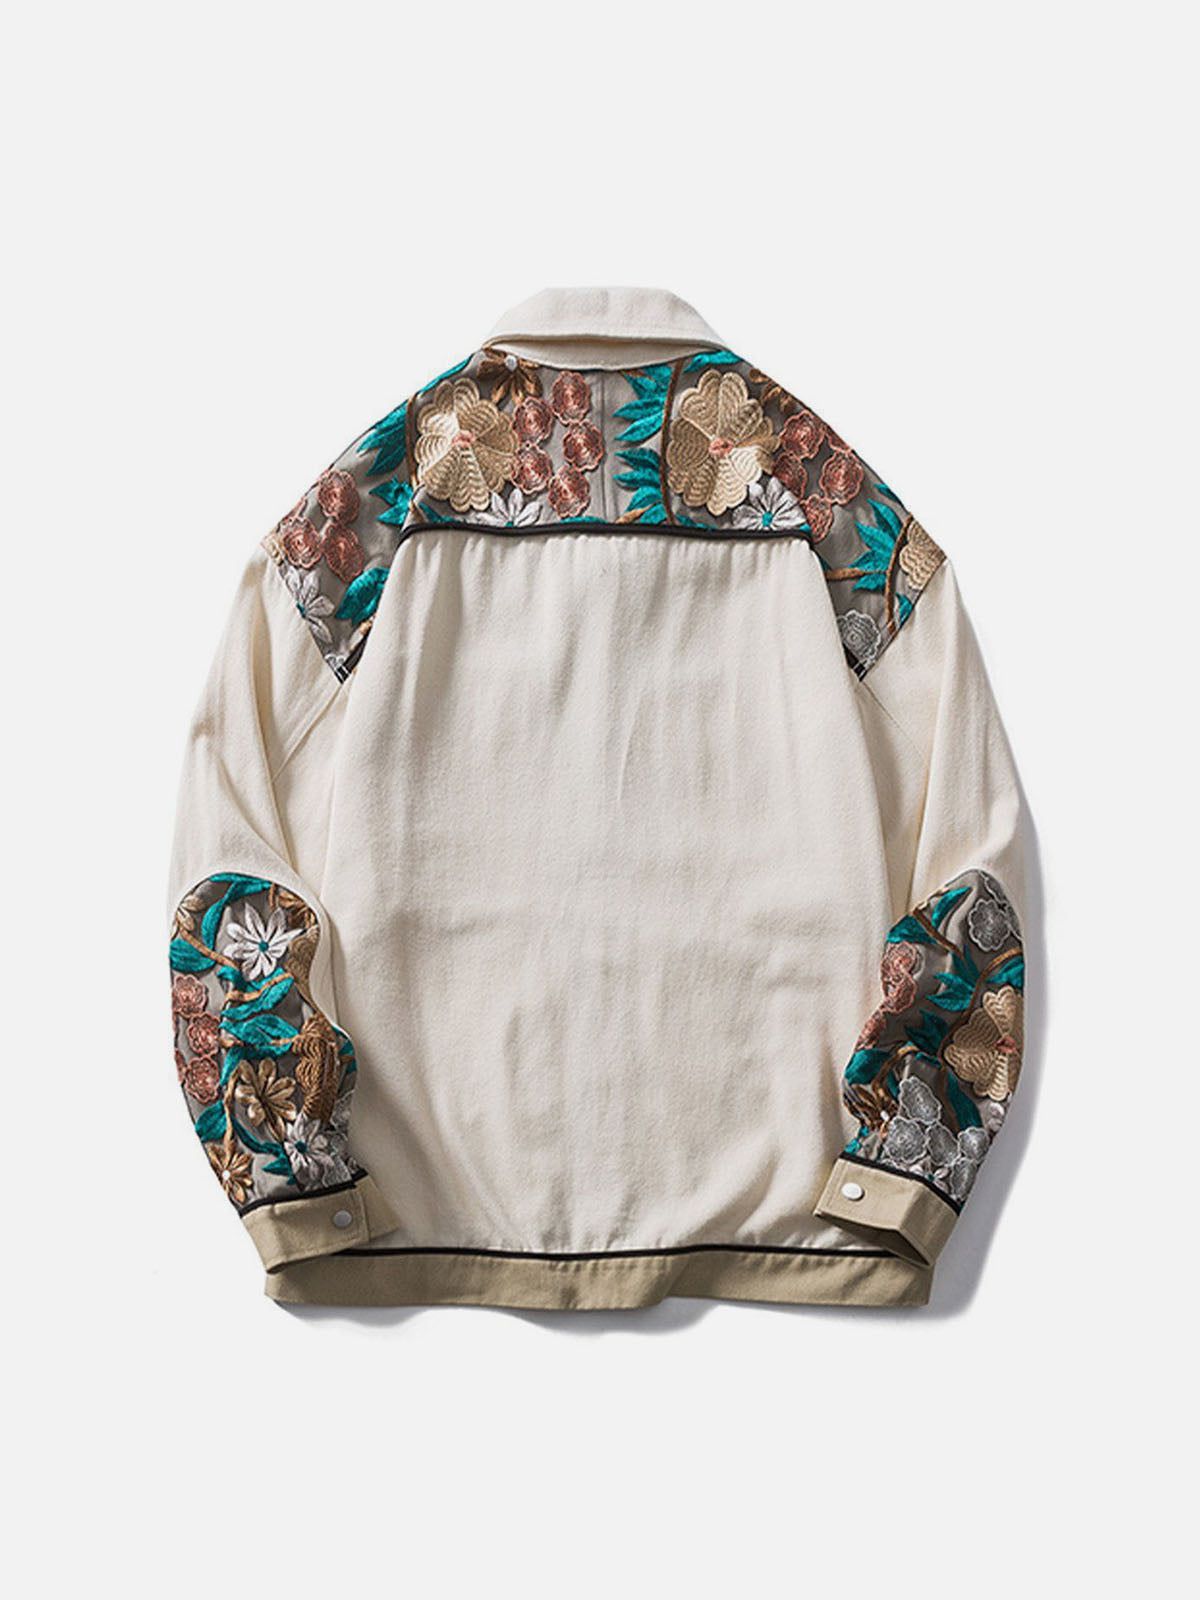 Vintage Flower Embroidery Stitching Jacket Streetwear Brand Techwear Combat Tactical YUGEN THEORY